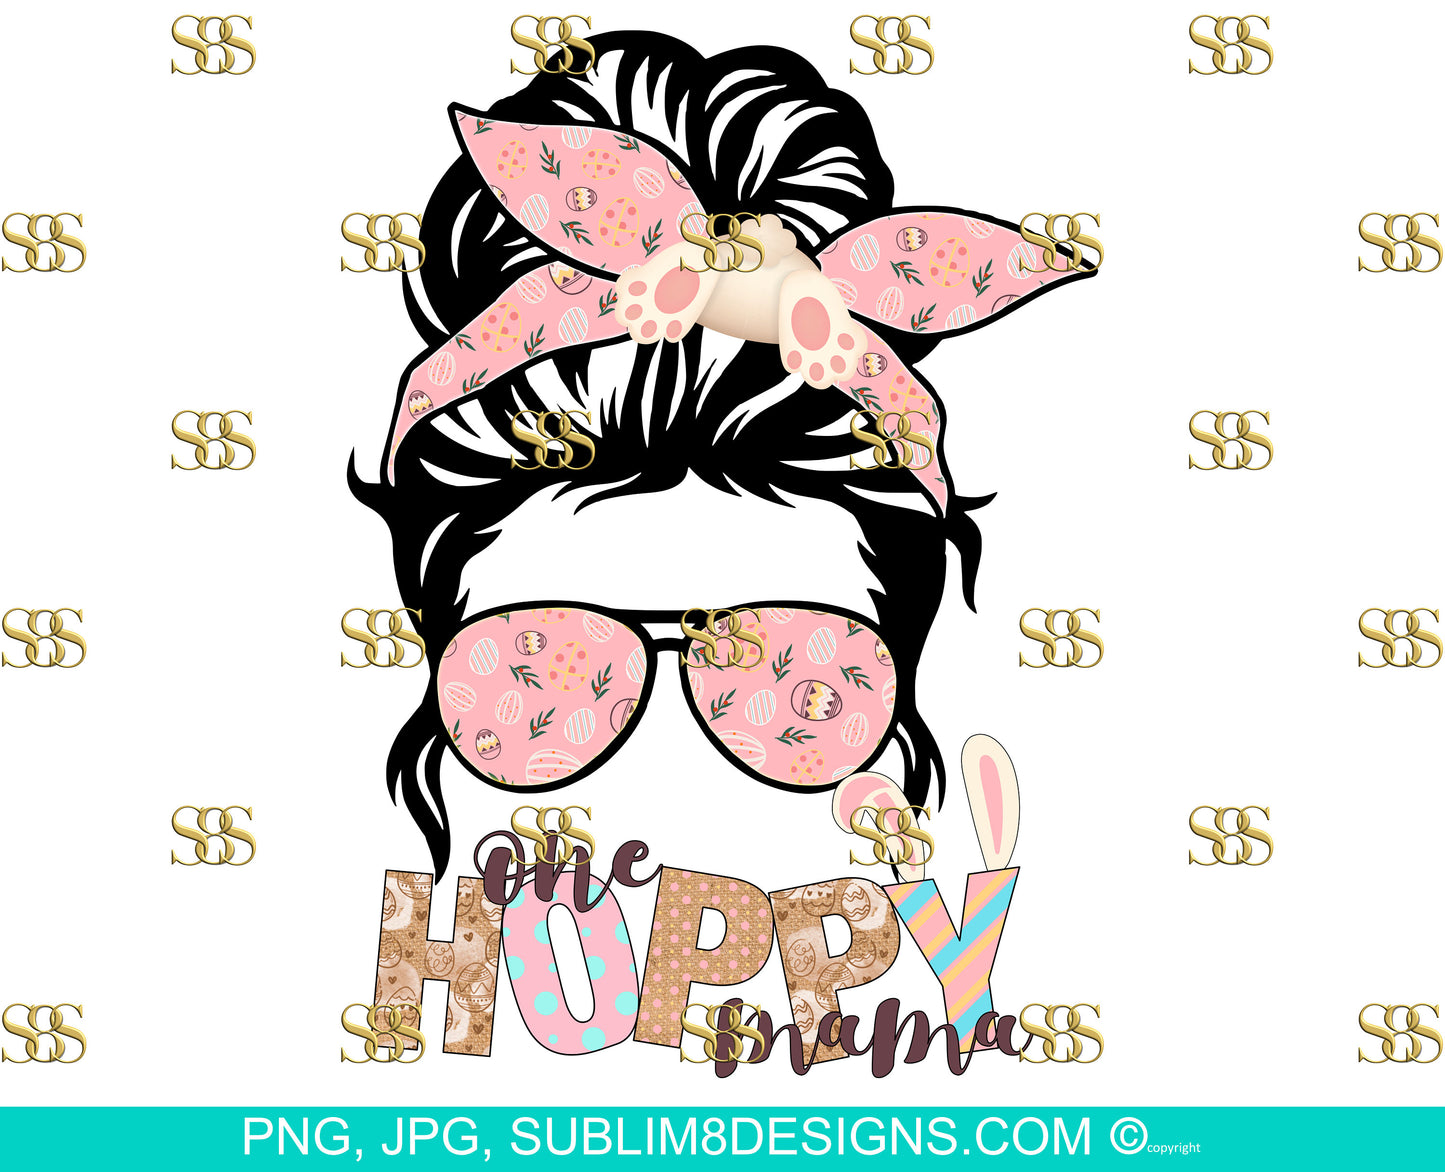 One Hoppy Mama Sublimation Design PNG and JPG ONLY